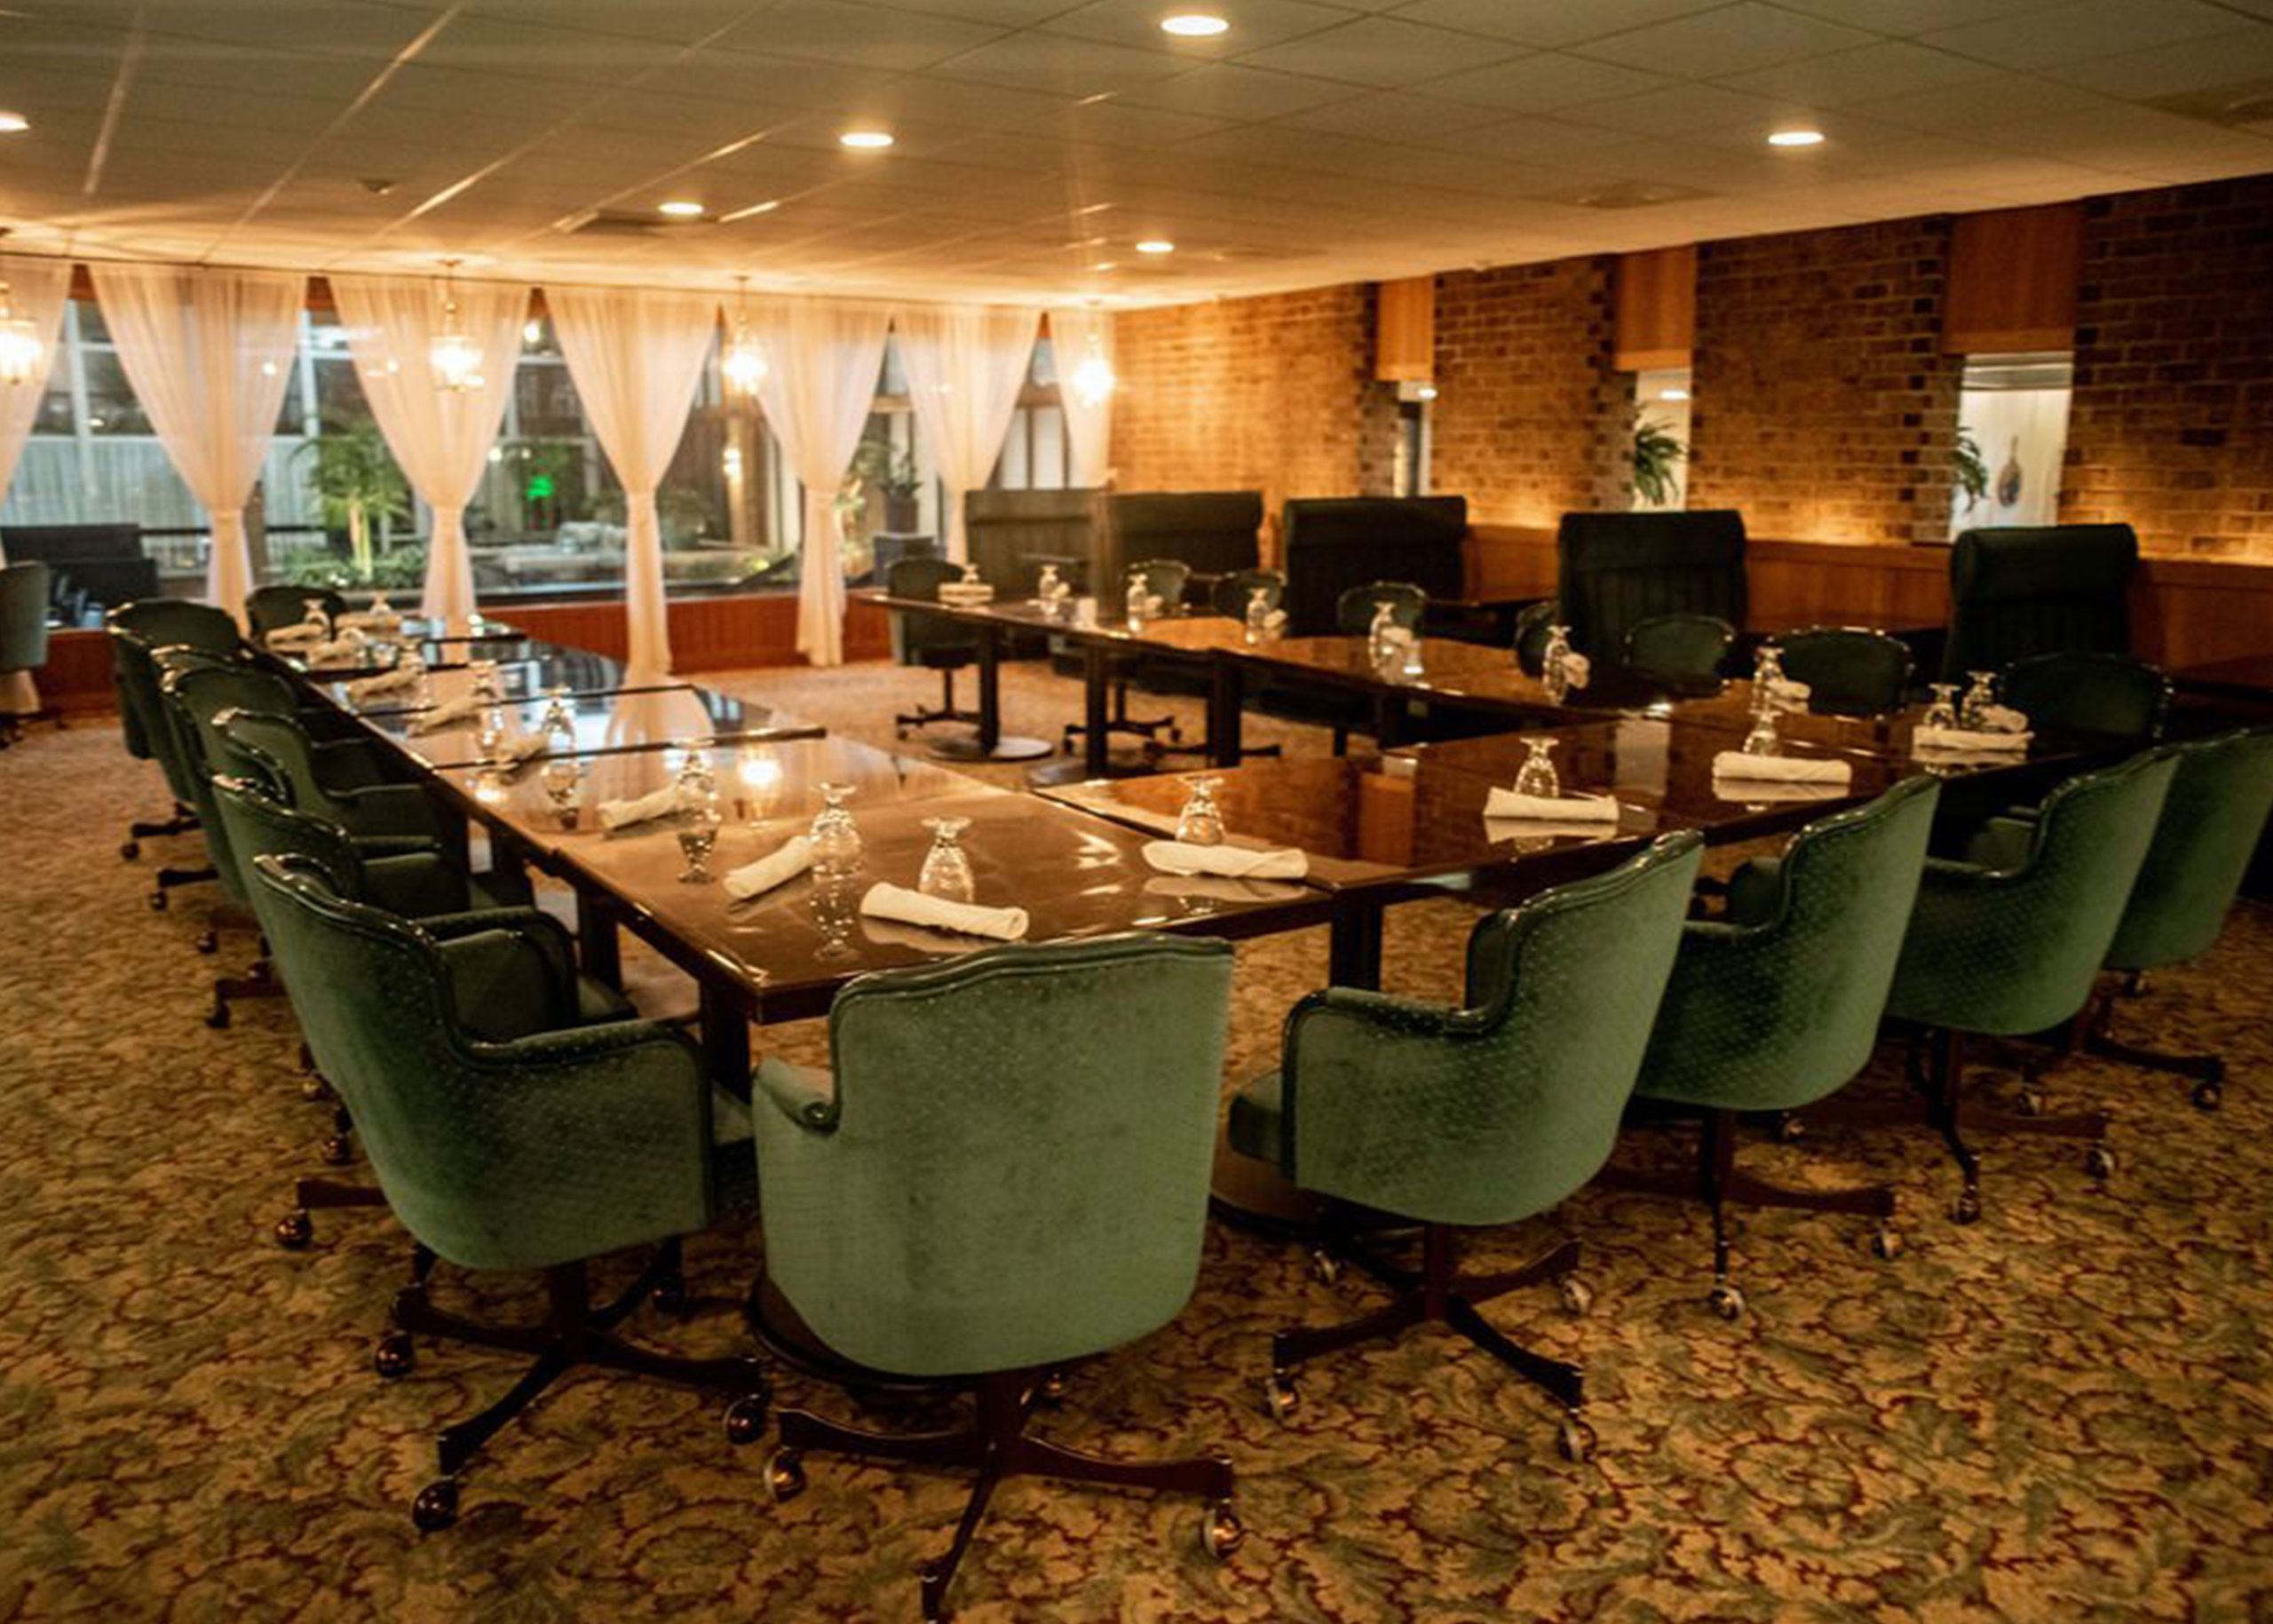 Meeting area Large U shaped table with silverware and glasses